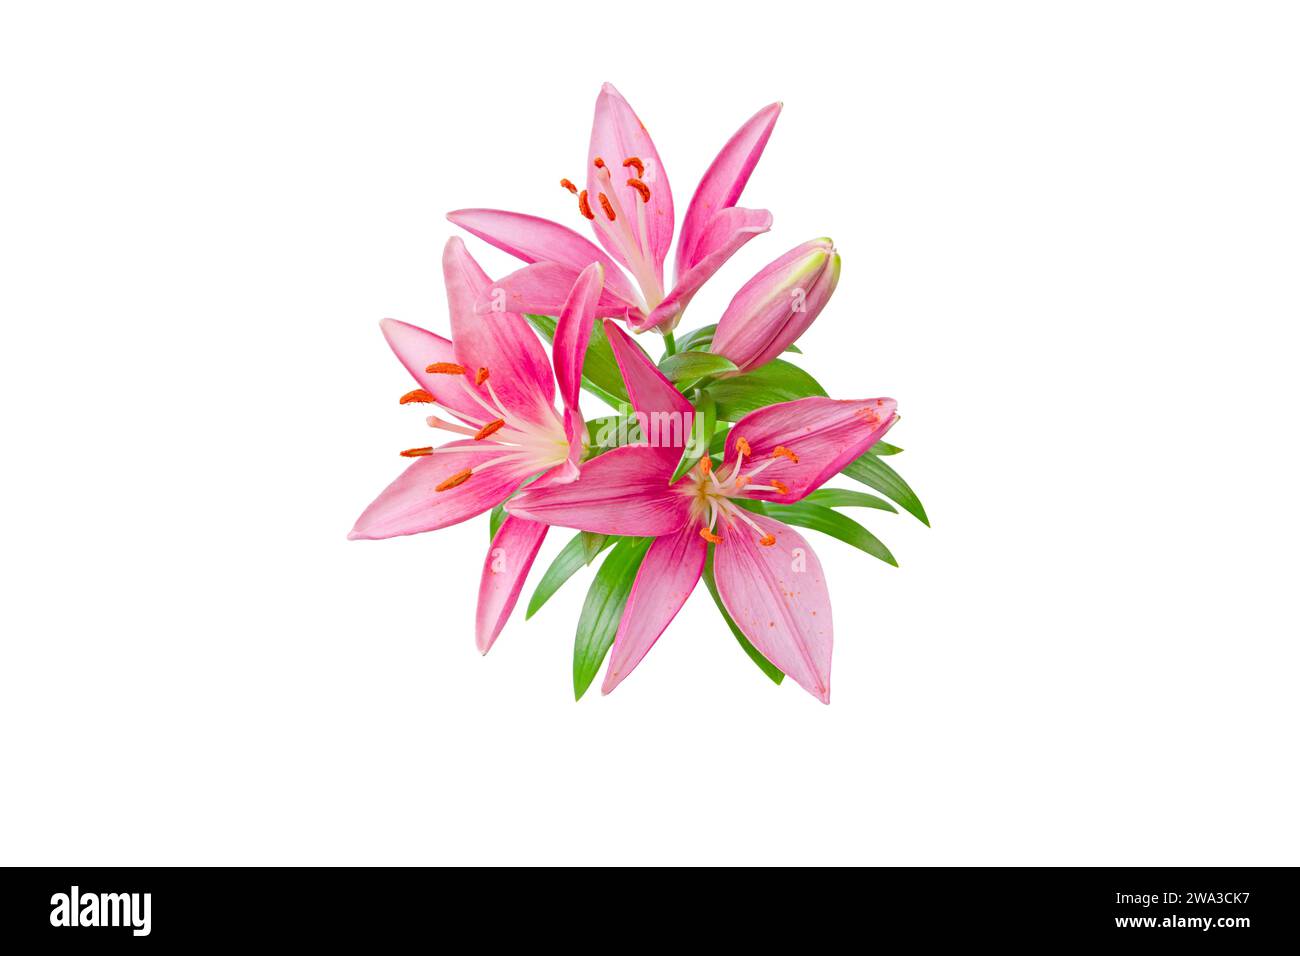 Pink lily flowers bunch isolated on white. Asiatic hybrids lilium plant. Stock Photo